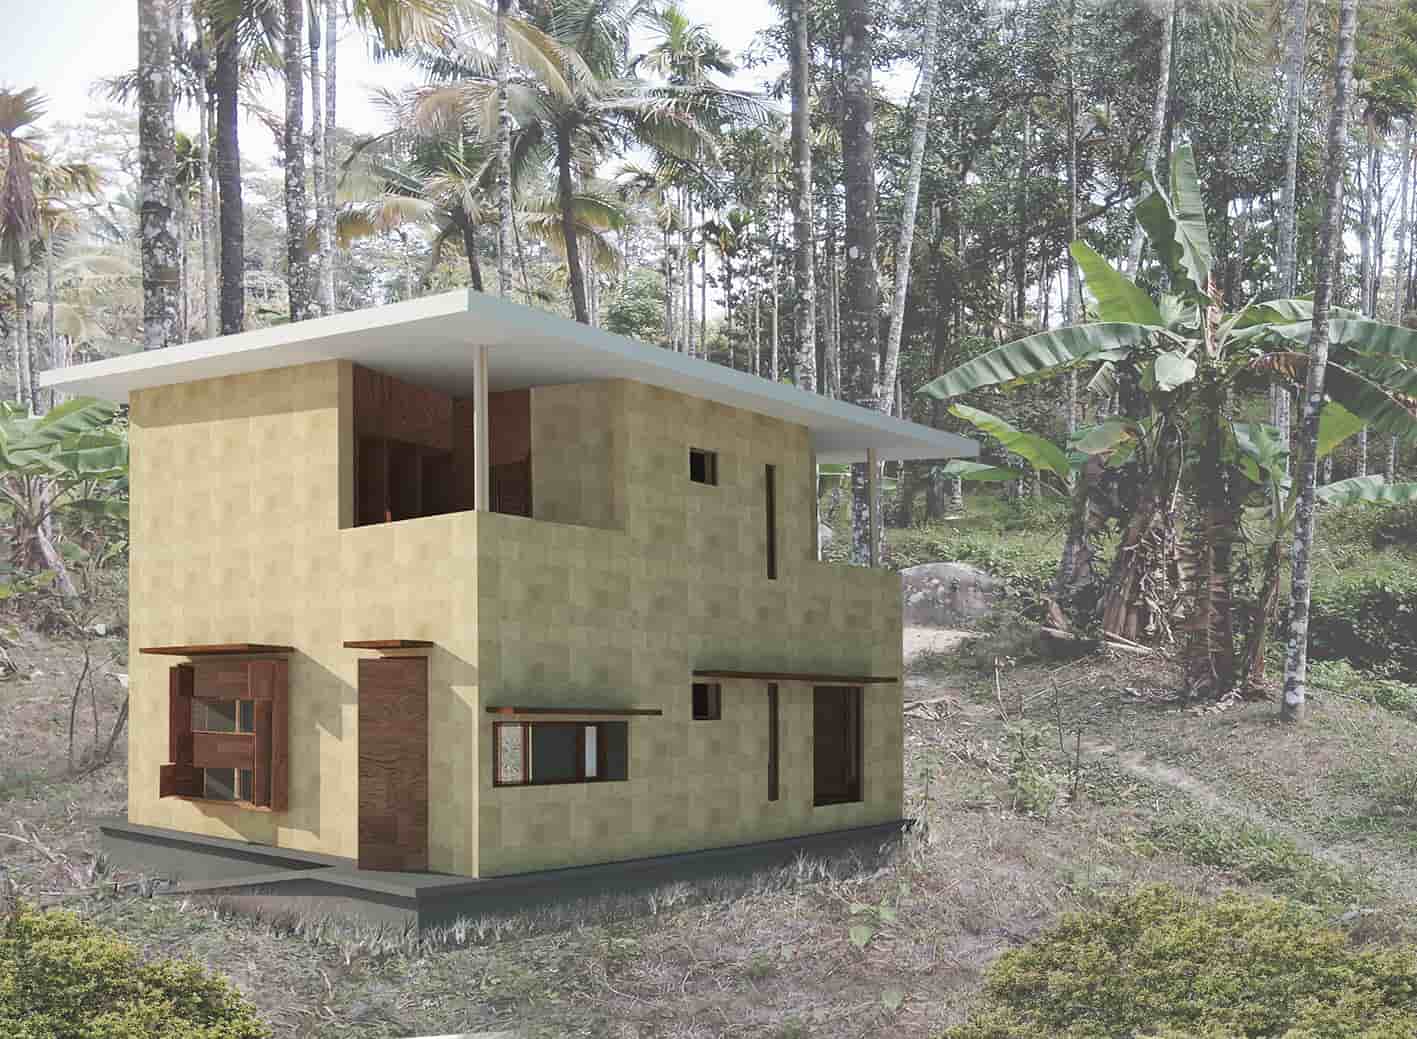 inch-lab-competition-forest-studio-box-kerala-2